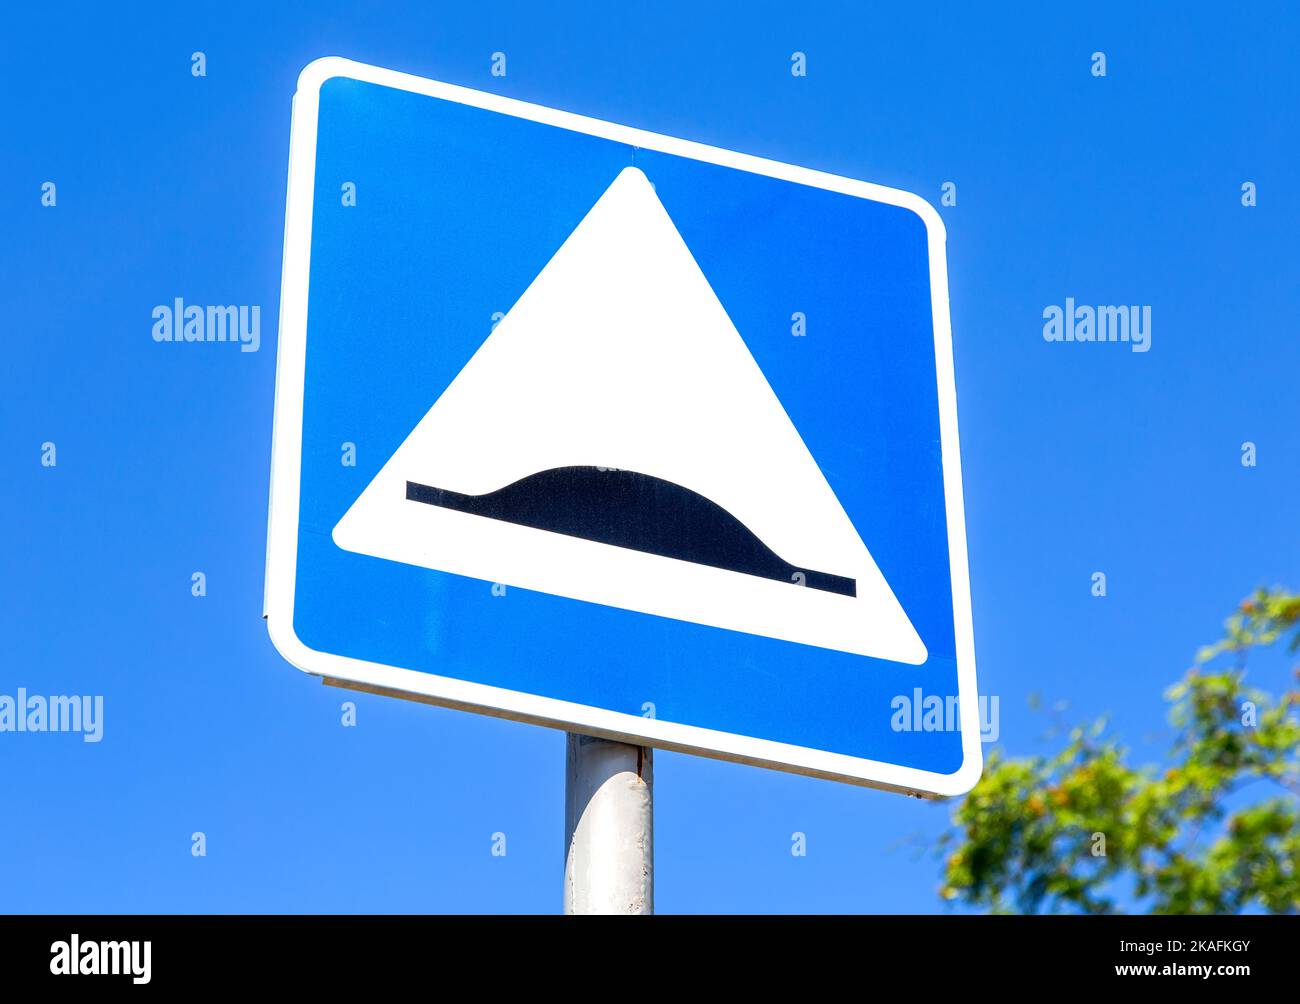 Triangle speed bump road sign against the blue sky. Warning traffic sign Speed bump Stock Photo